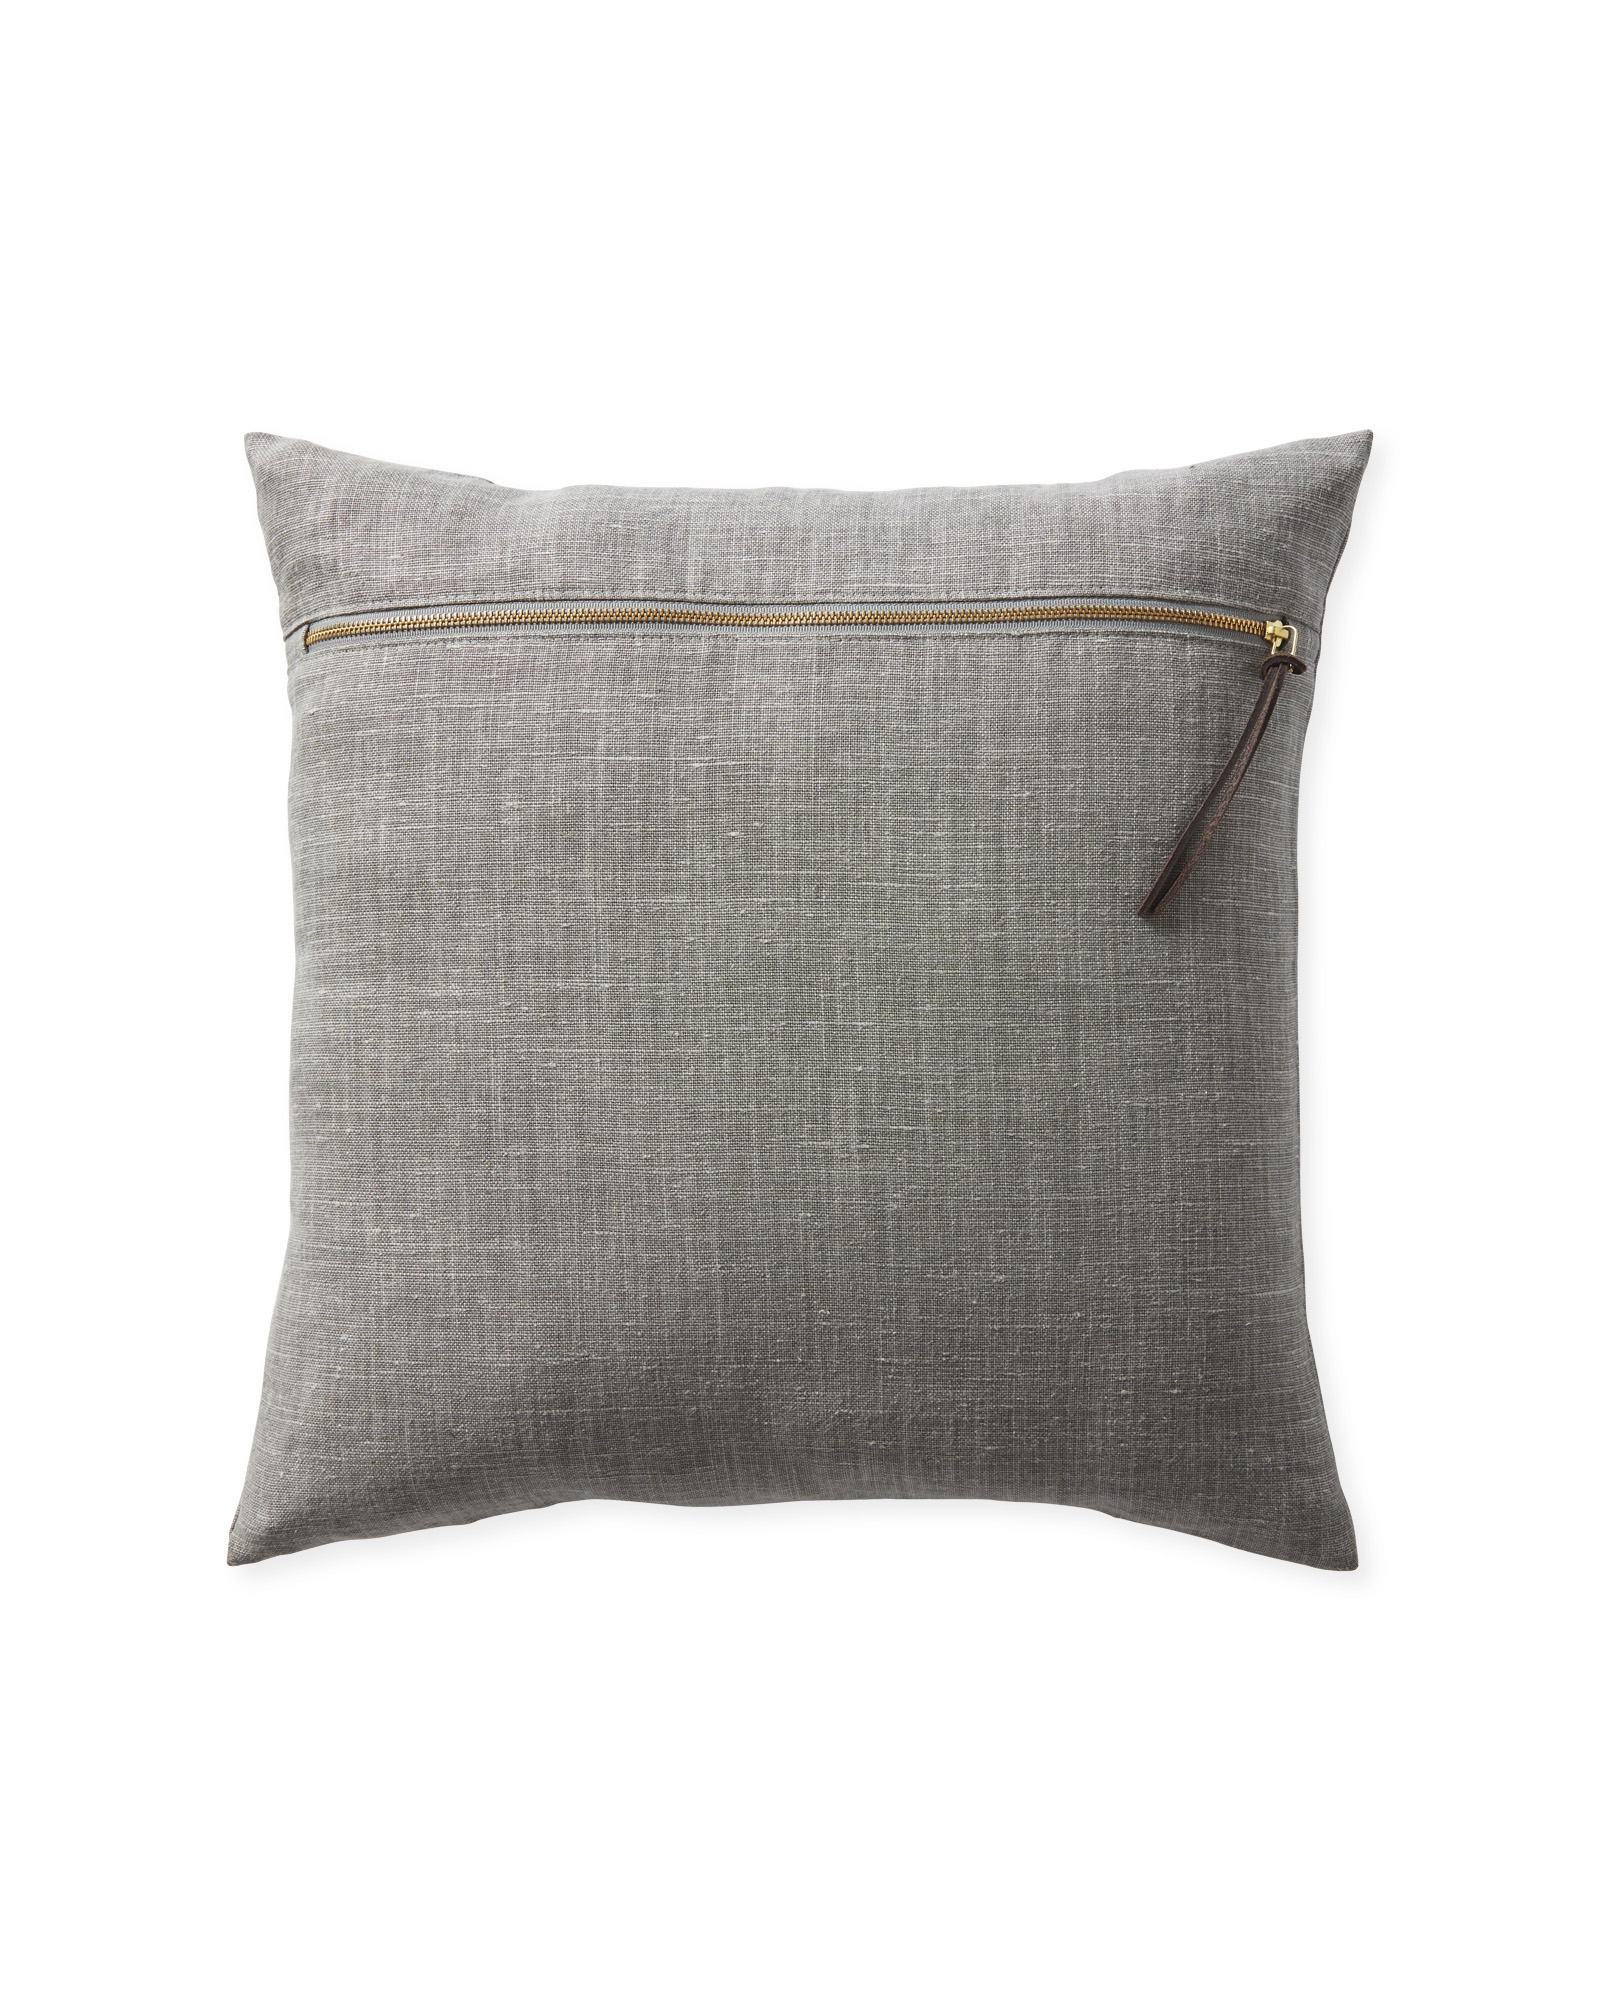 Kentfield 20" SQ Pillow Cover - Smoke - Insert sold separately - Image 1